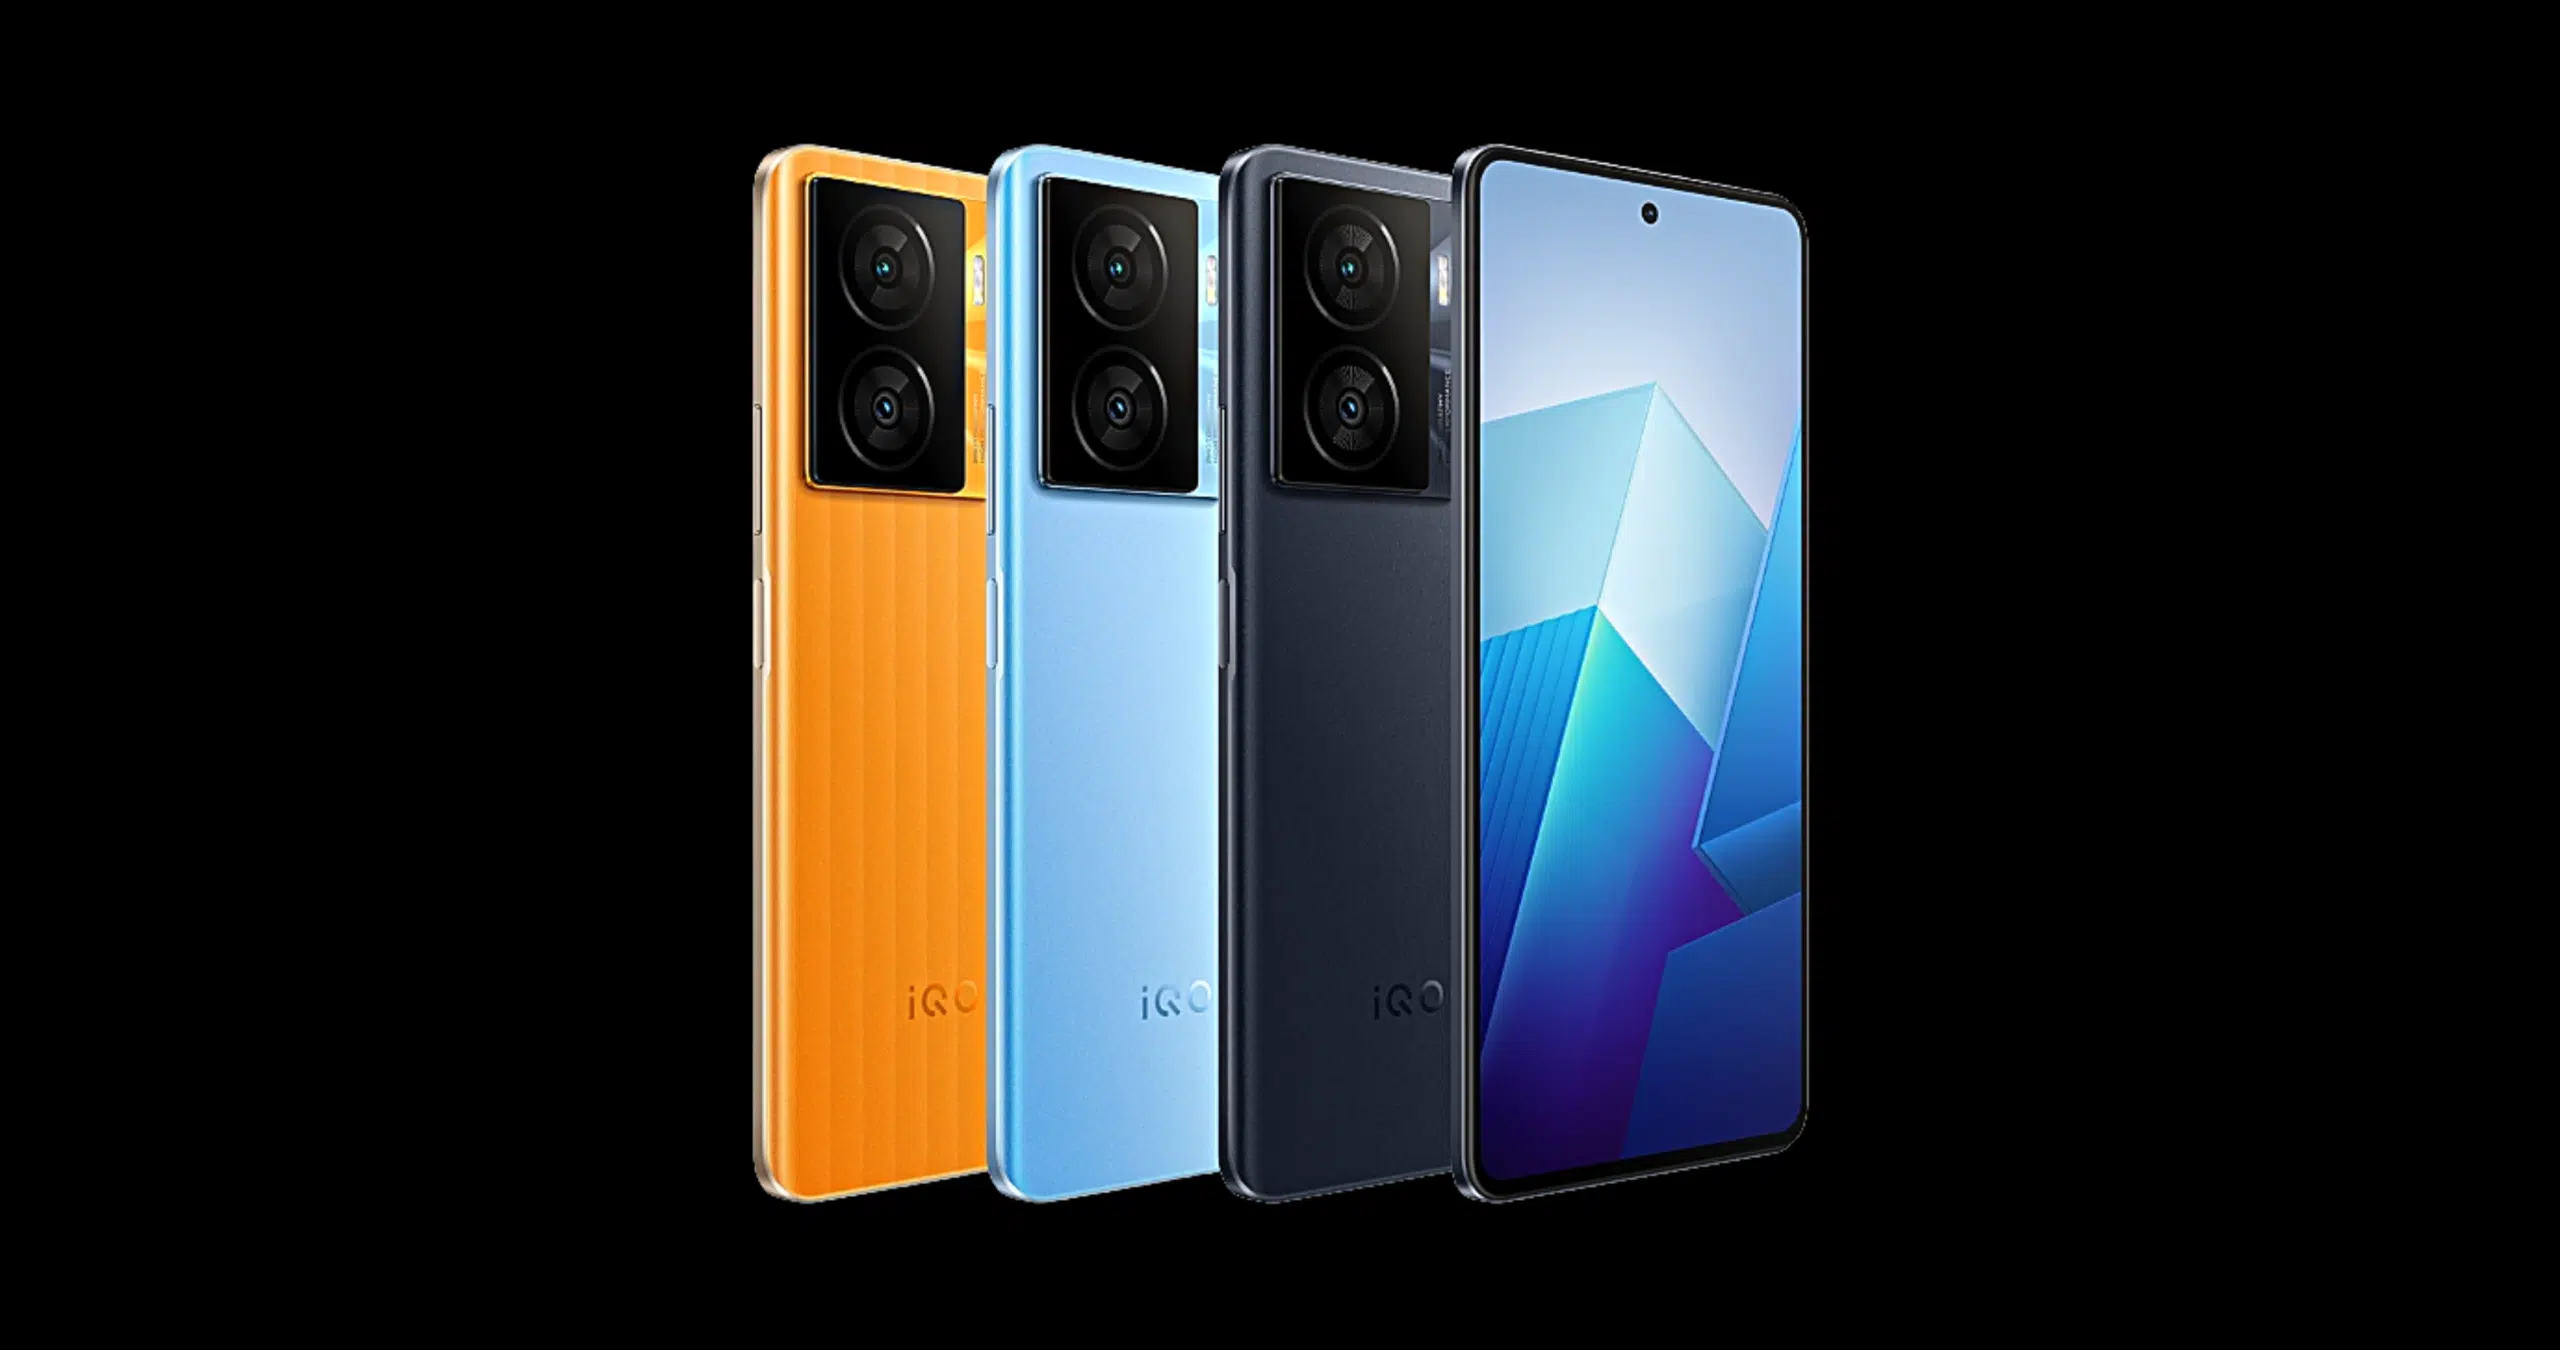 iQOO Z7 launched in China